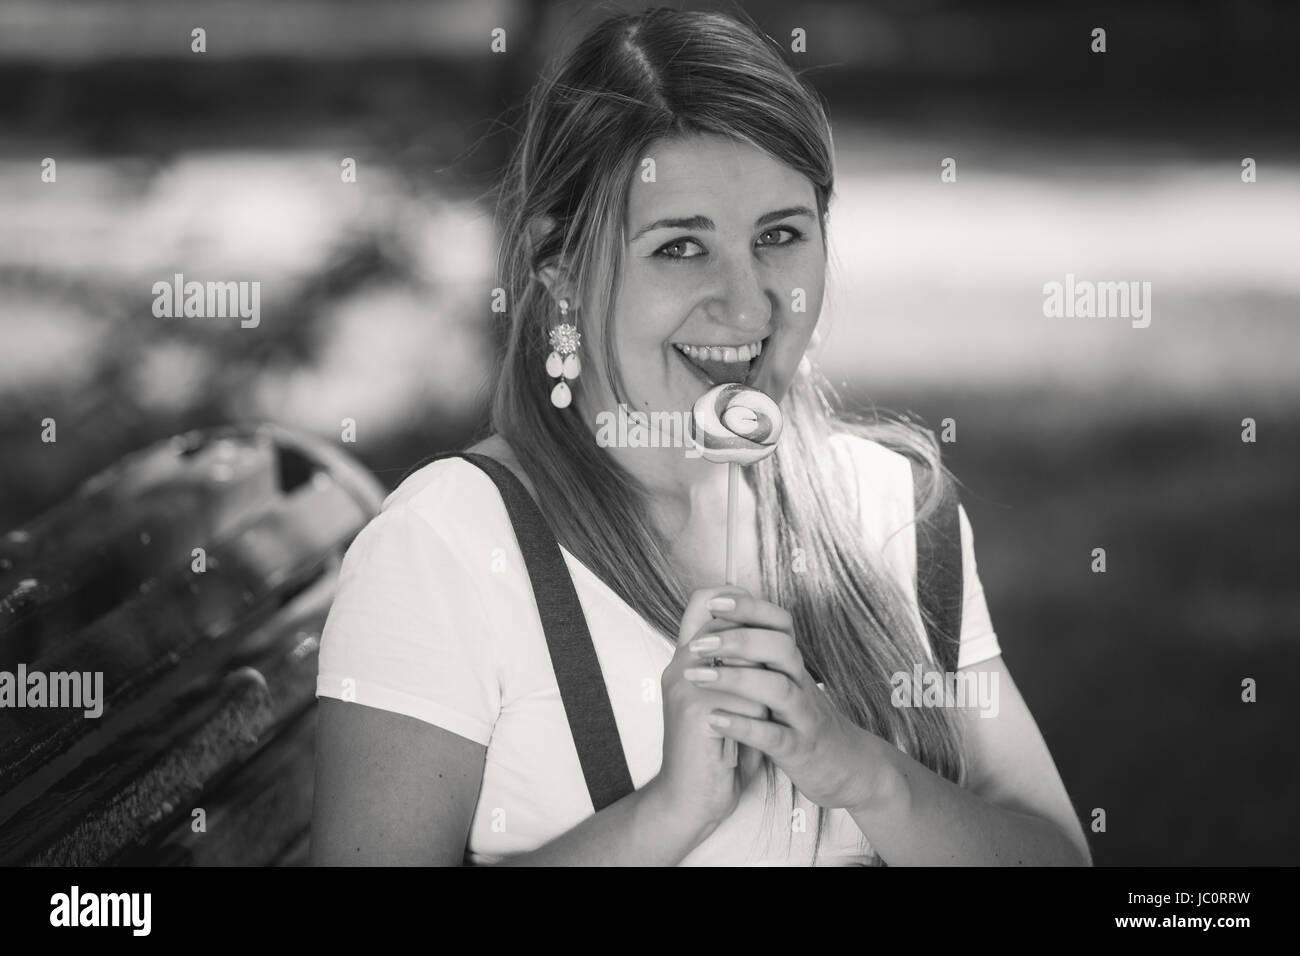 Black and white portrait of cute woman licking lollipop at park Stock Photo